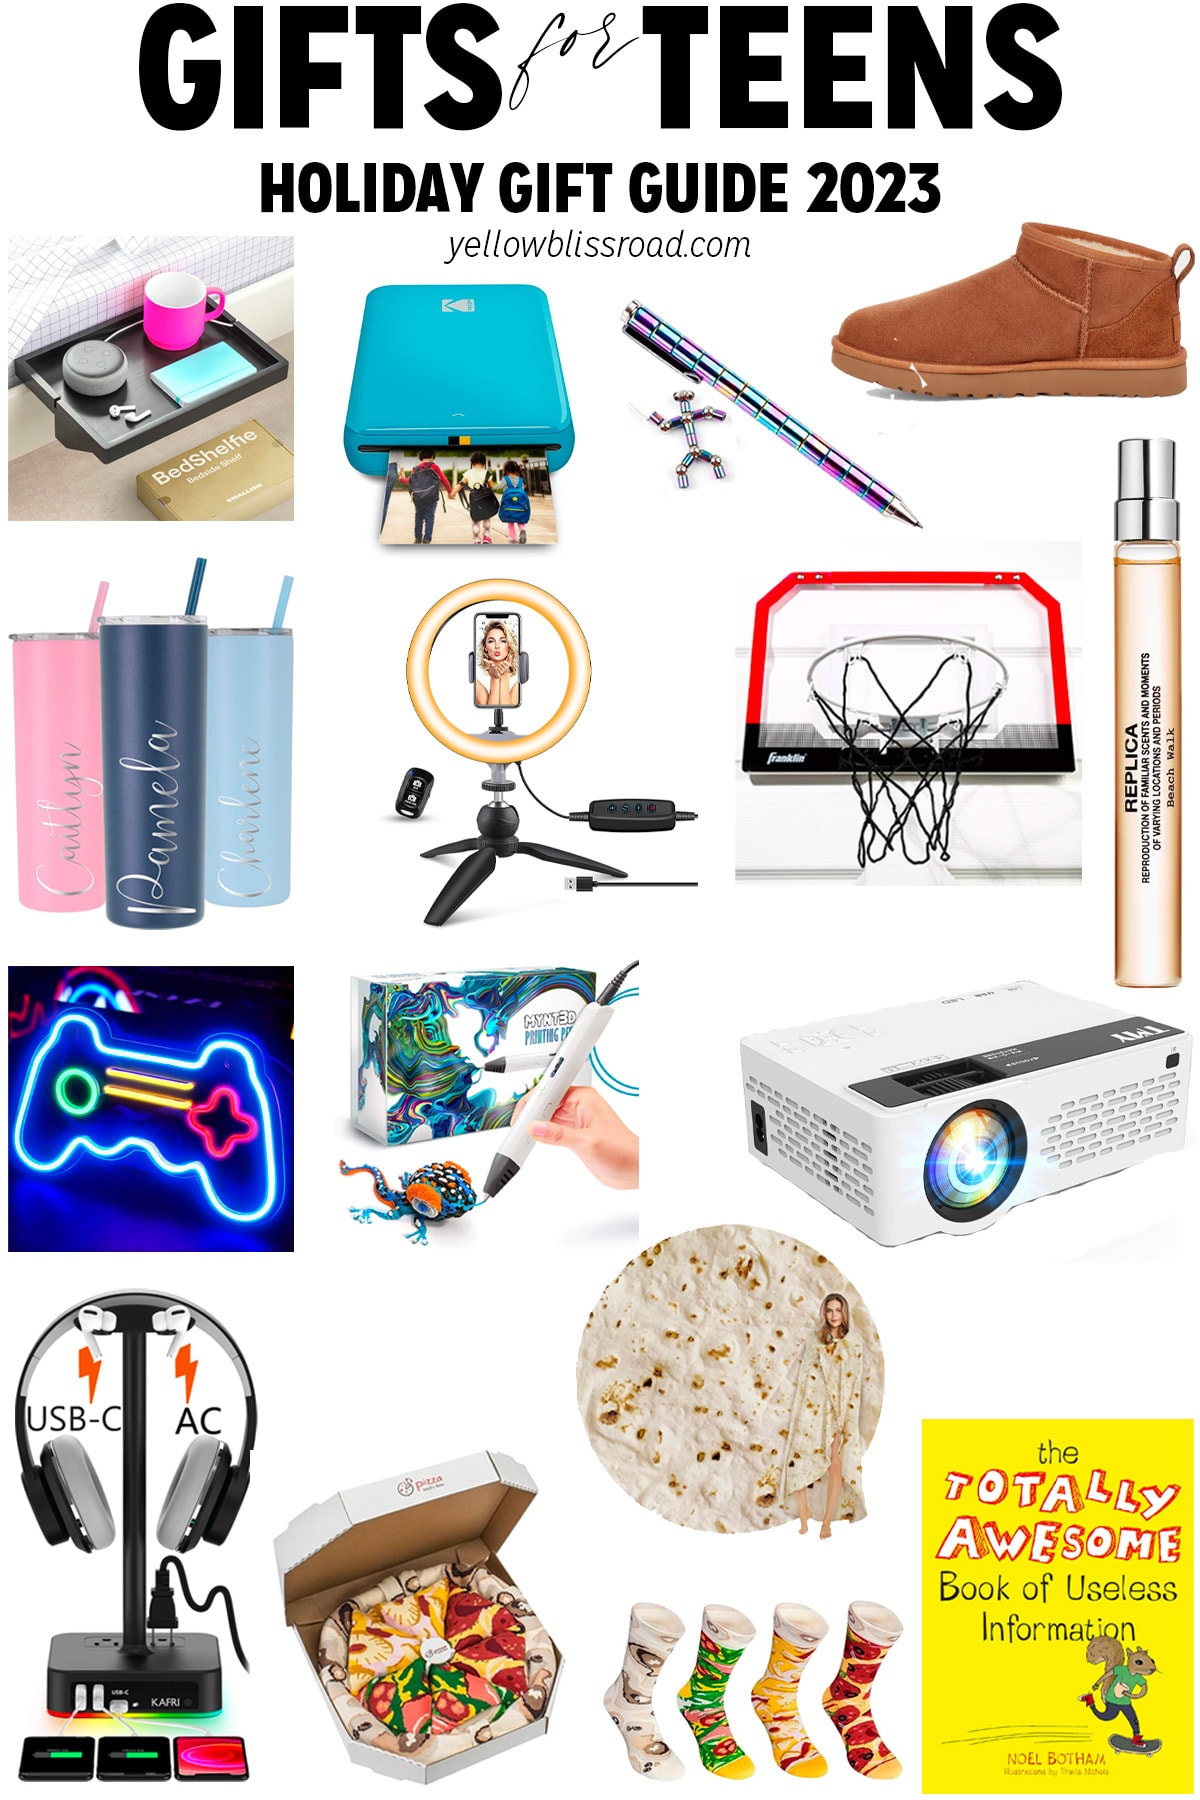 Best Gift Ideas & Home Gifts Guide 2023